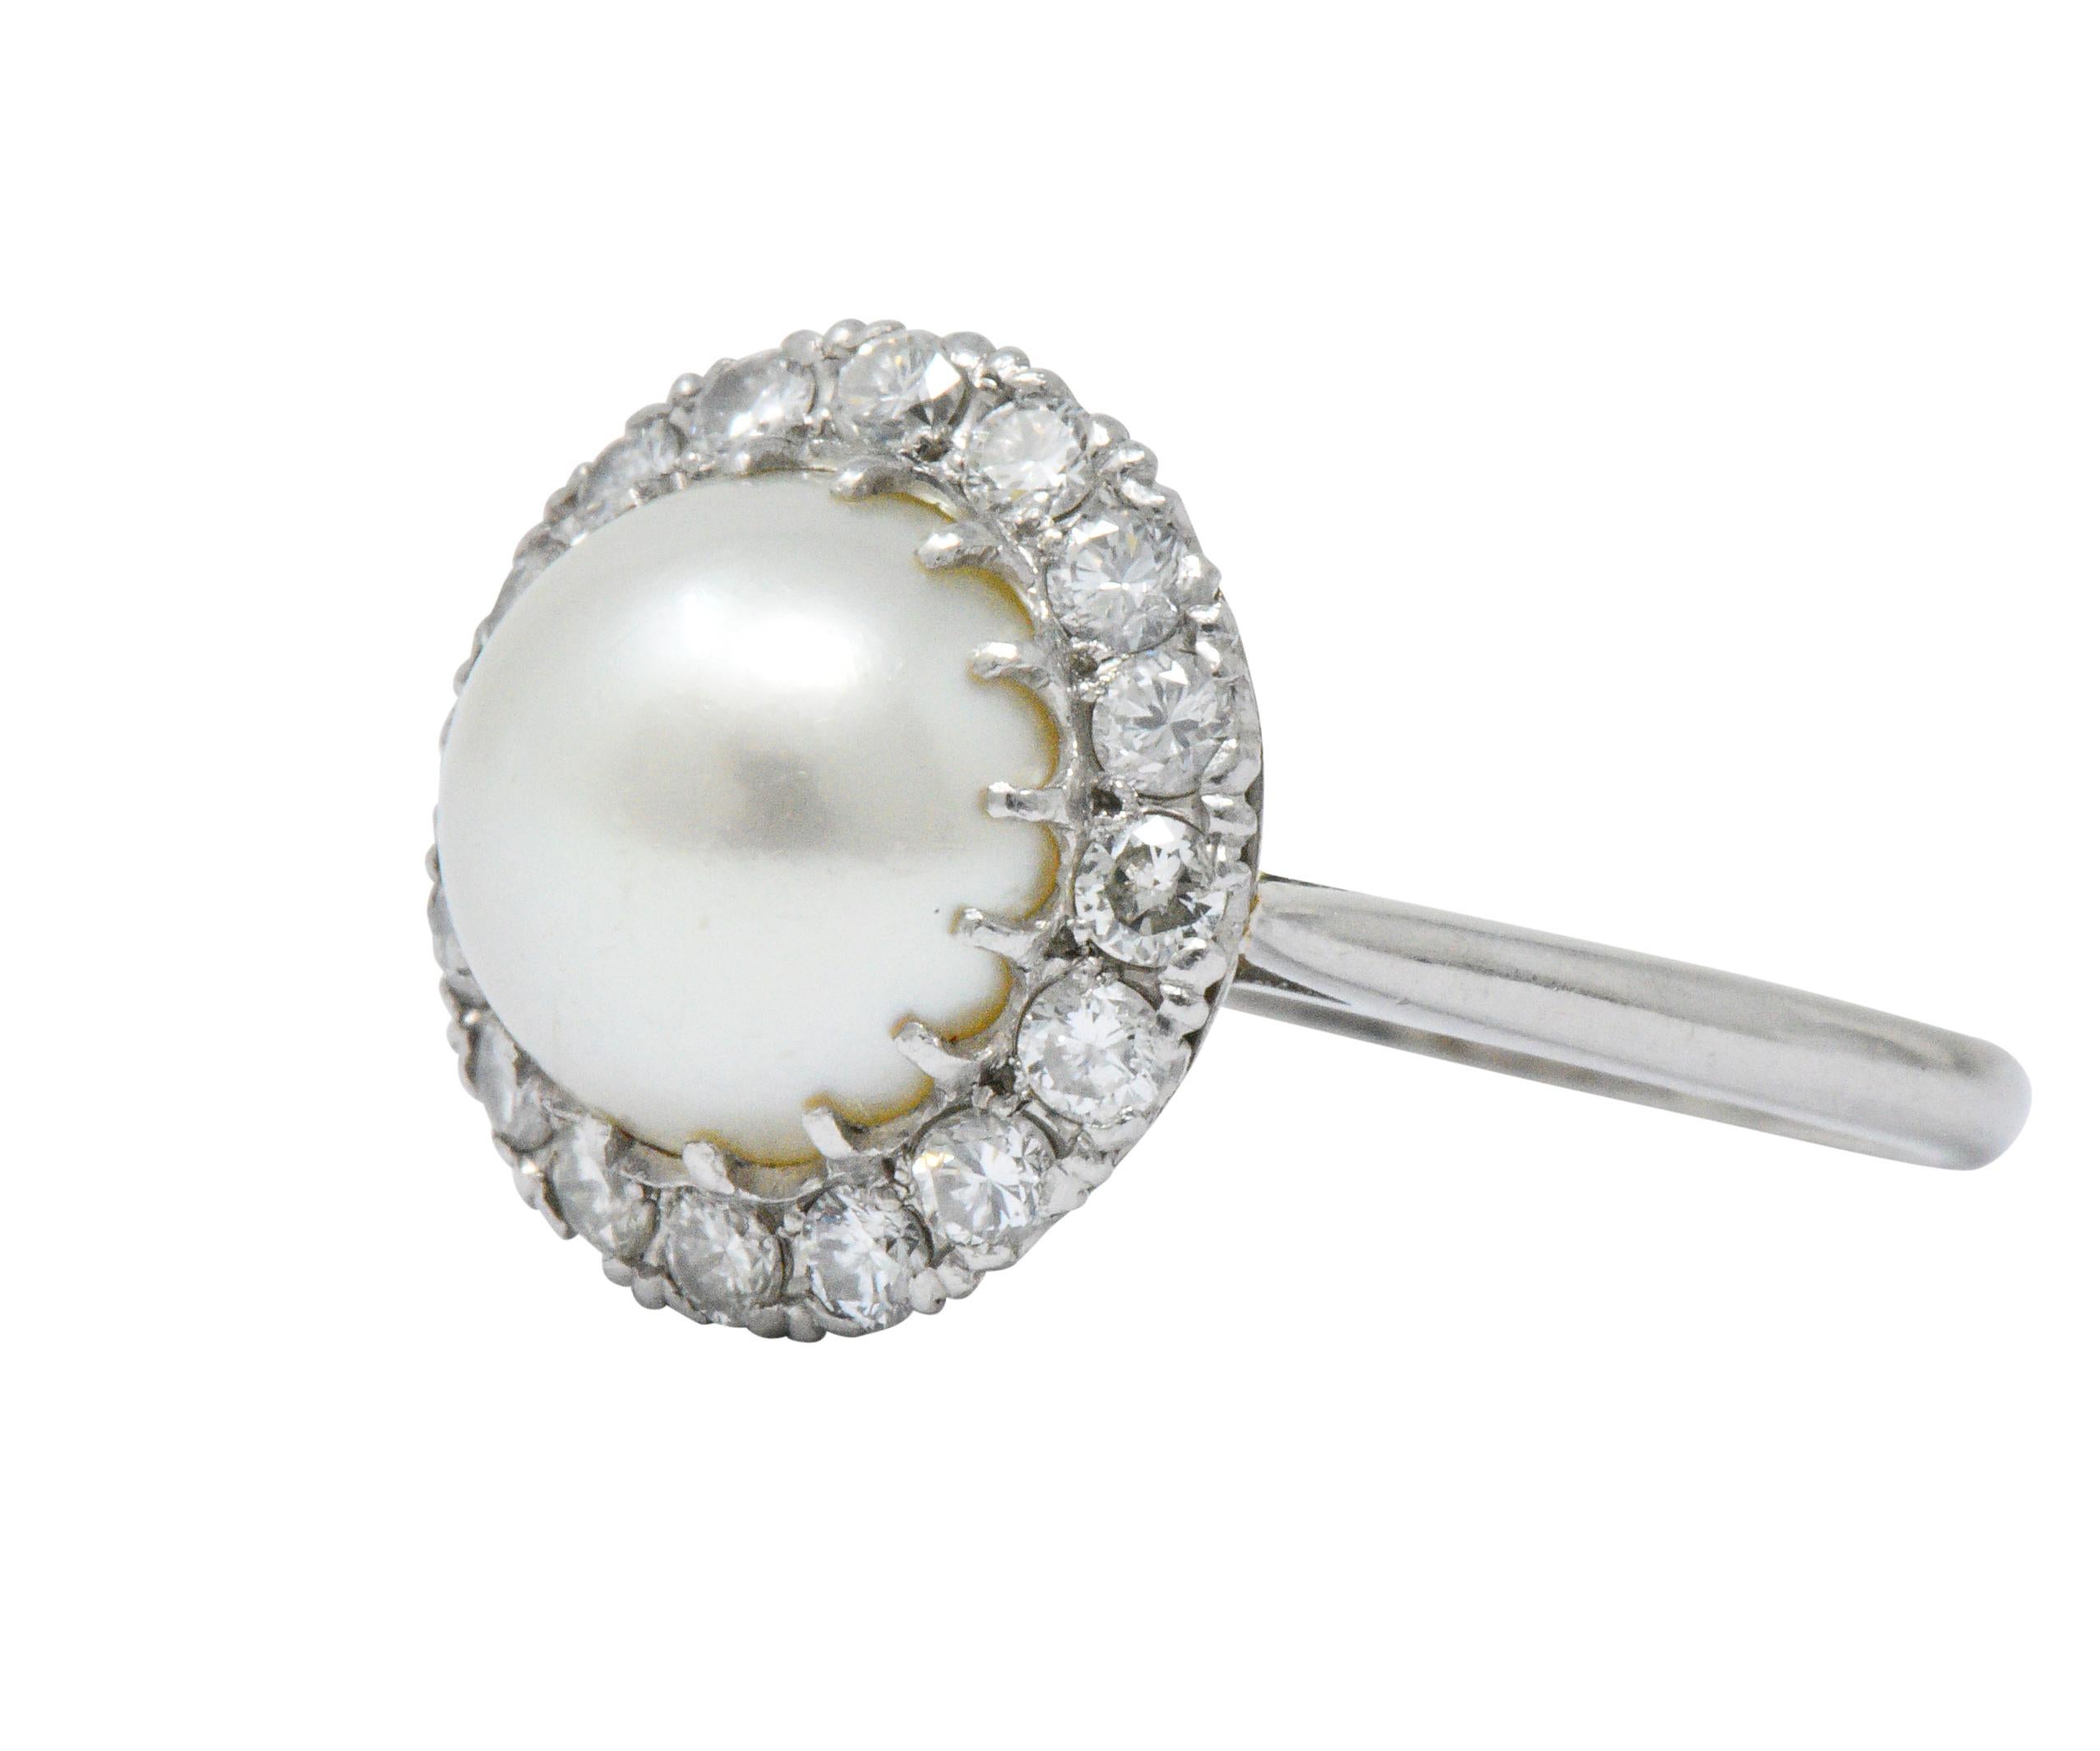 Centering a round cultured pearl, measuring approximately 9.6 mm, light cream body color with rose and green overtones, very good luster and surface quality 

Round brilliant cut diamond surround contains 16 diamonds weighing approximately 0.50